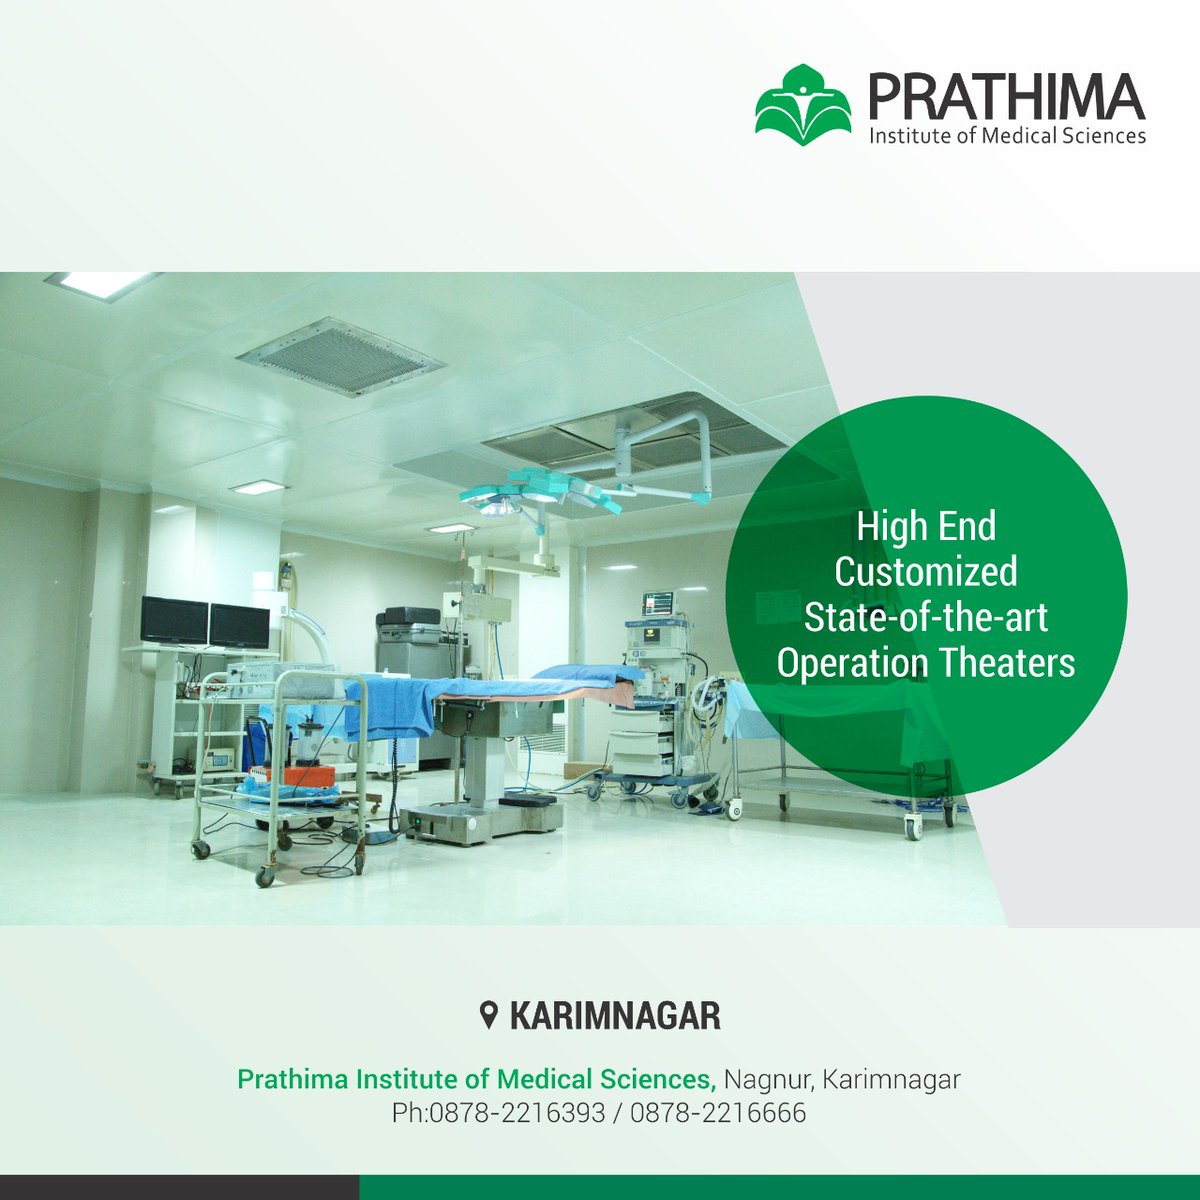 Prathima Institute of Medical Sciences (#PrathimaHospitals) Karimnagar

Equipped with High-End Customized State-of-the-art Operation Theaters.

For any Medical Emergency 
📞:: 0878 221 6666 / 0878 221 6393

#operationtheaters #Operation #Surgery #OT #criticalcare #pims